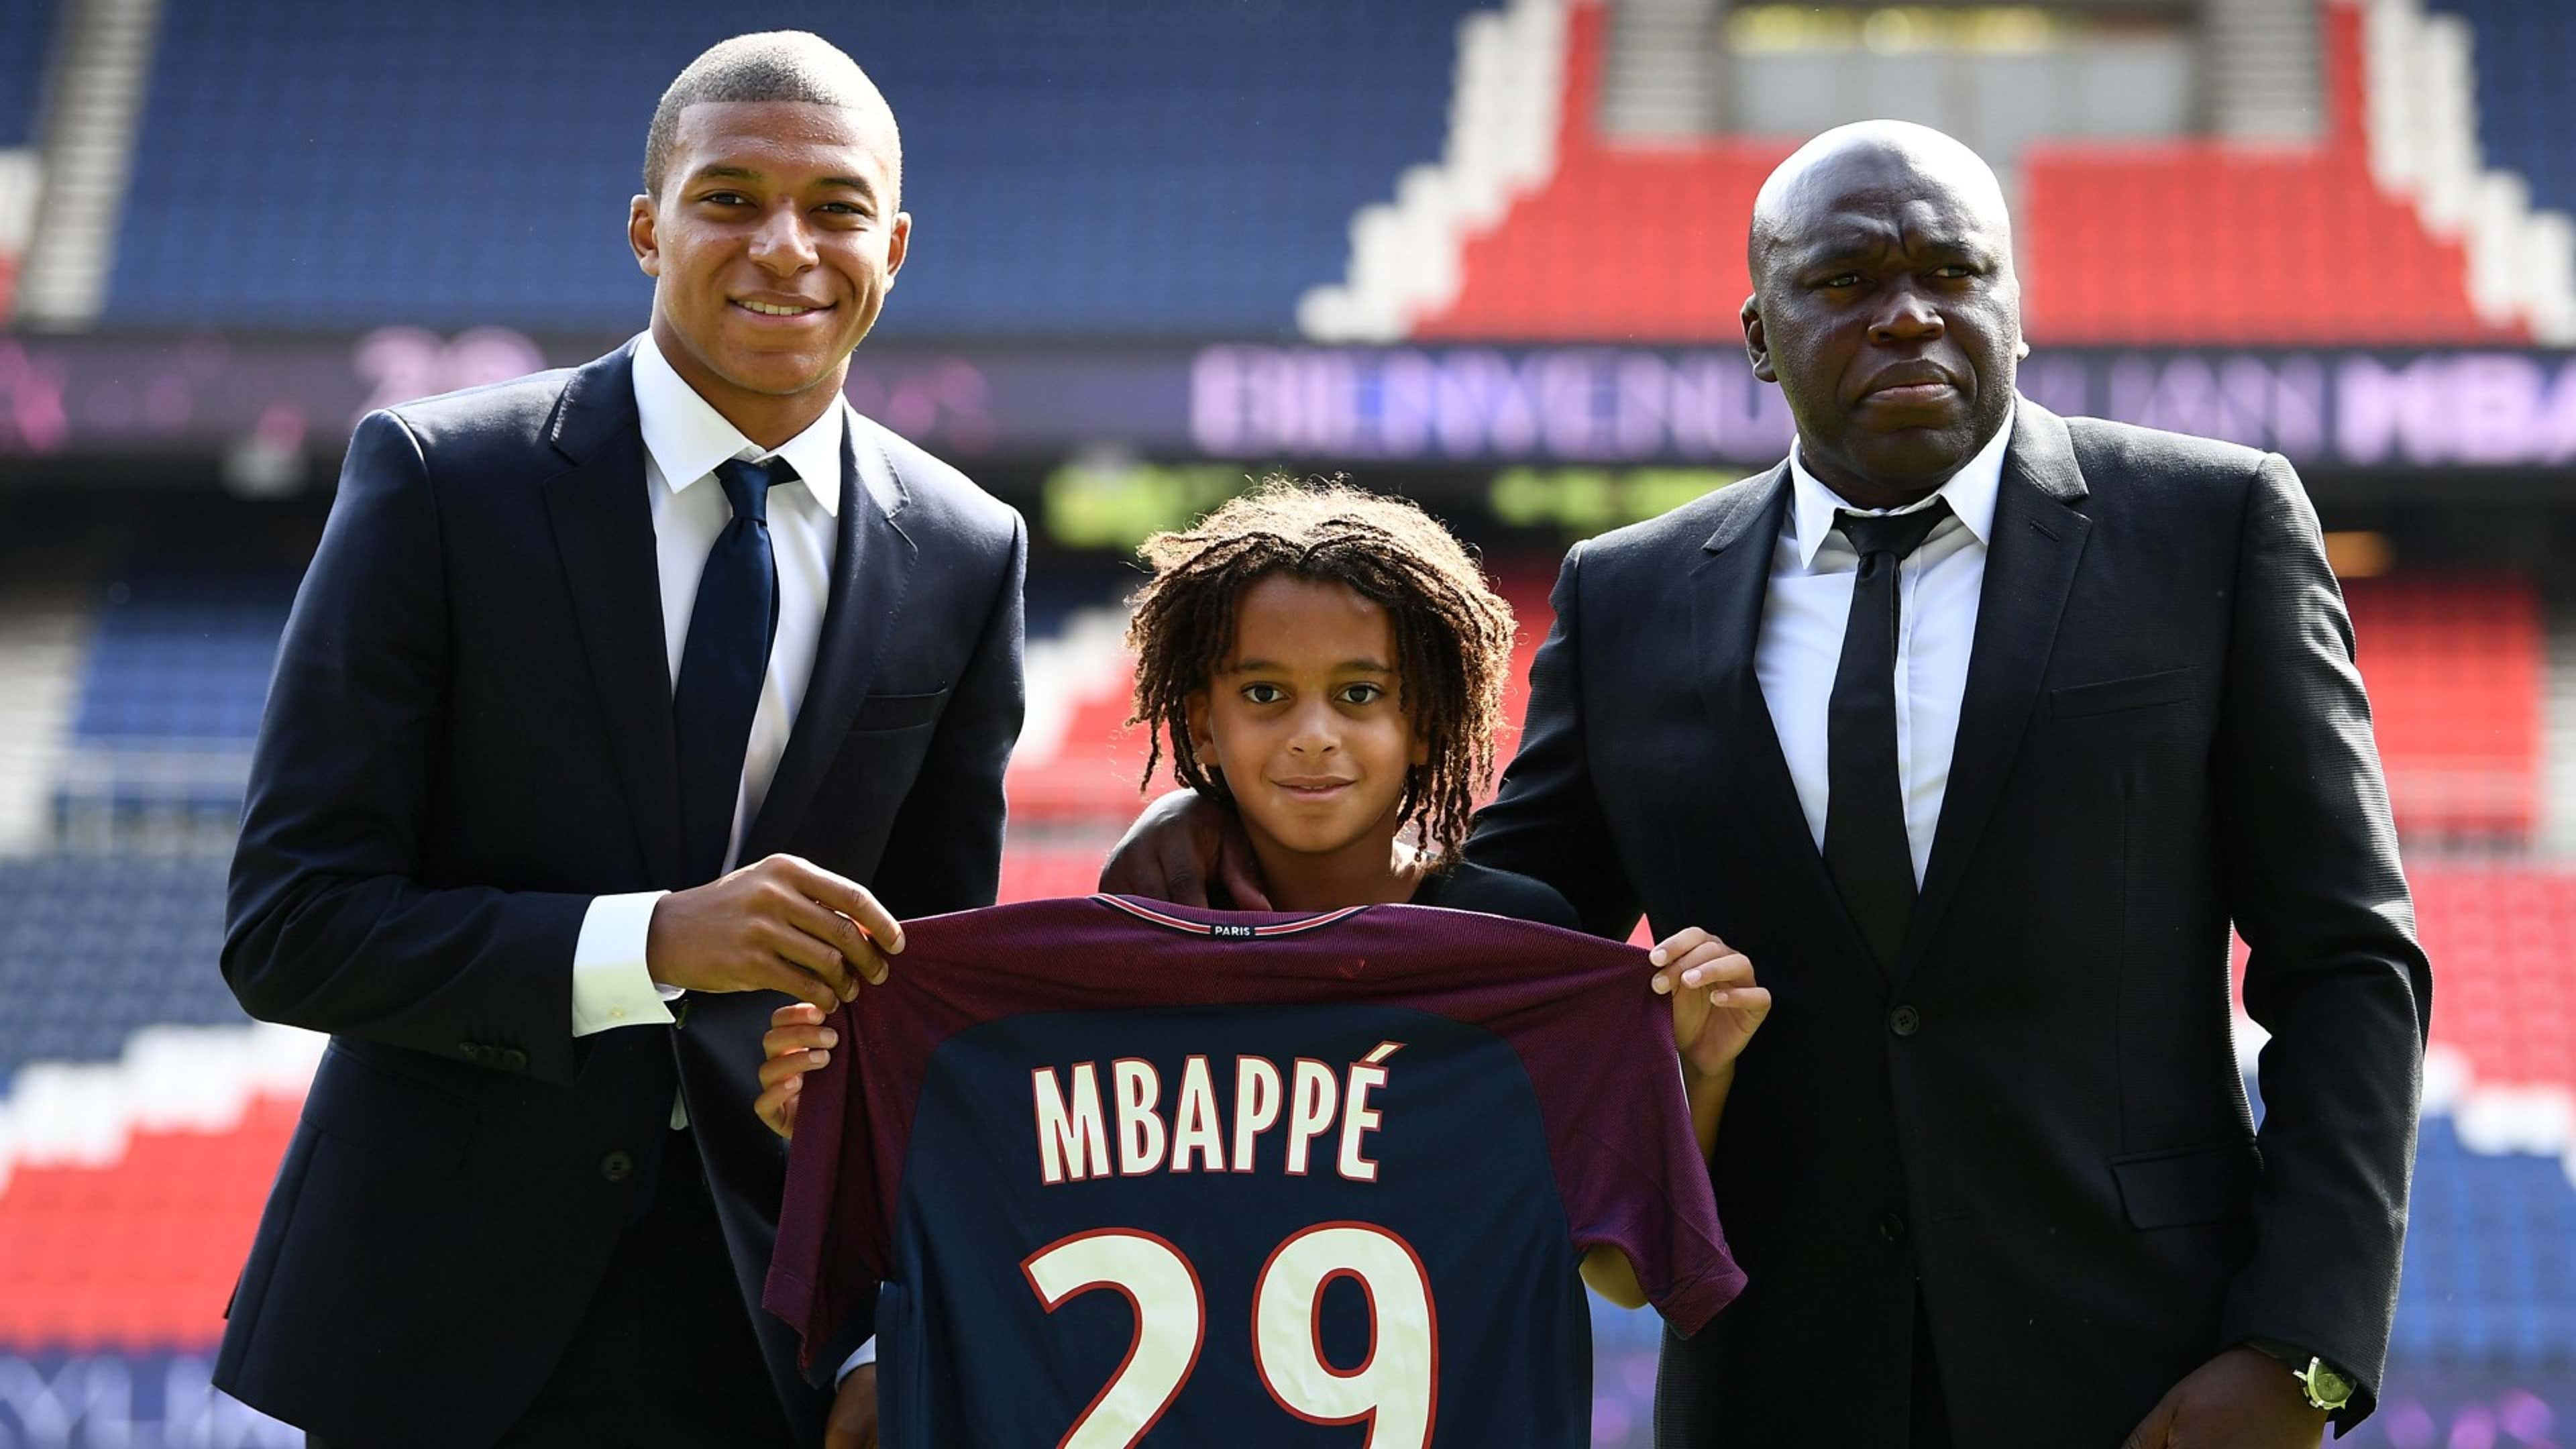 biography of ethan mbappe